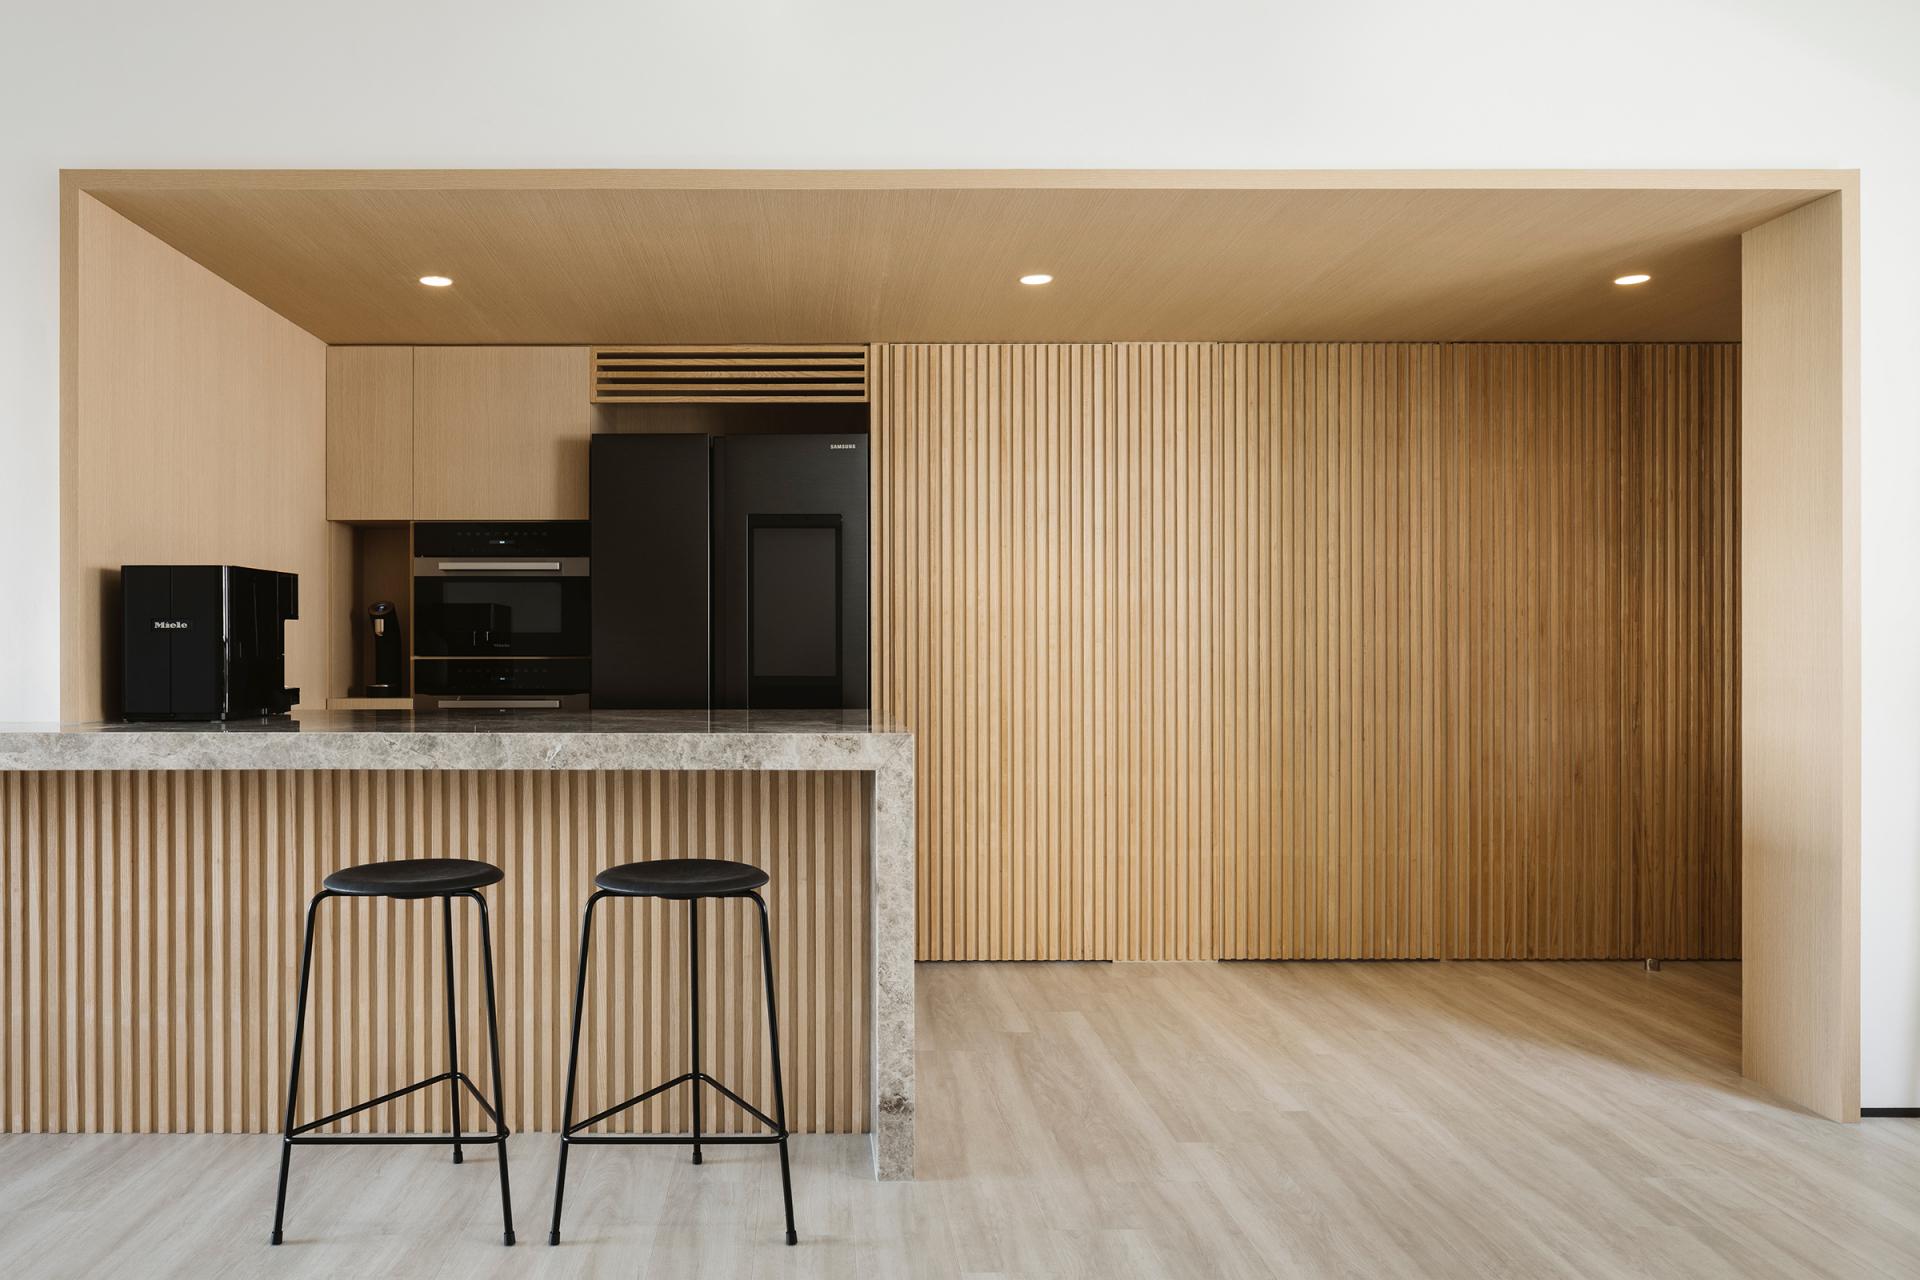 This two-storey Singapore apartment was designed to feel like a Japanese ryokan